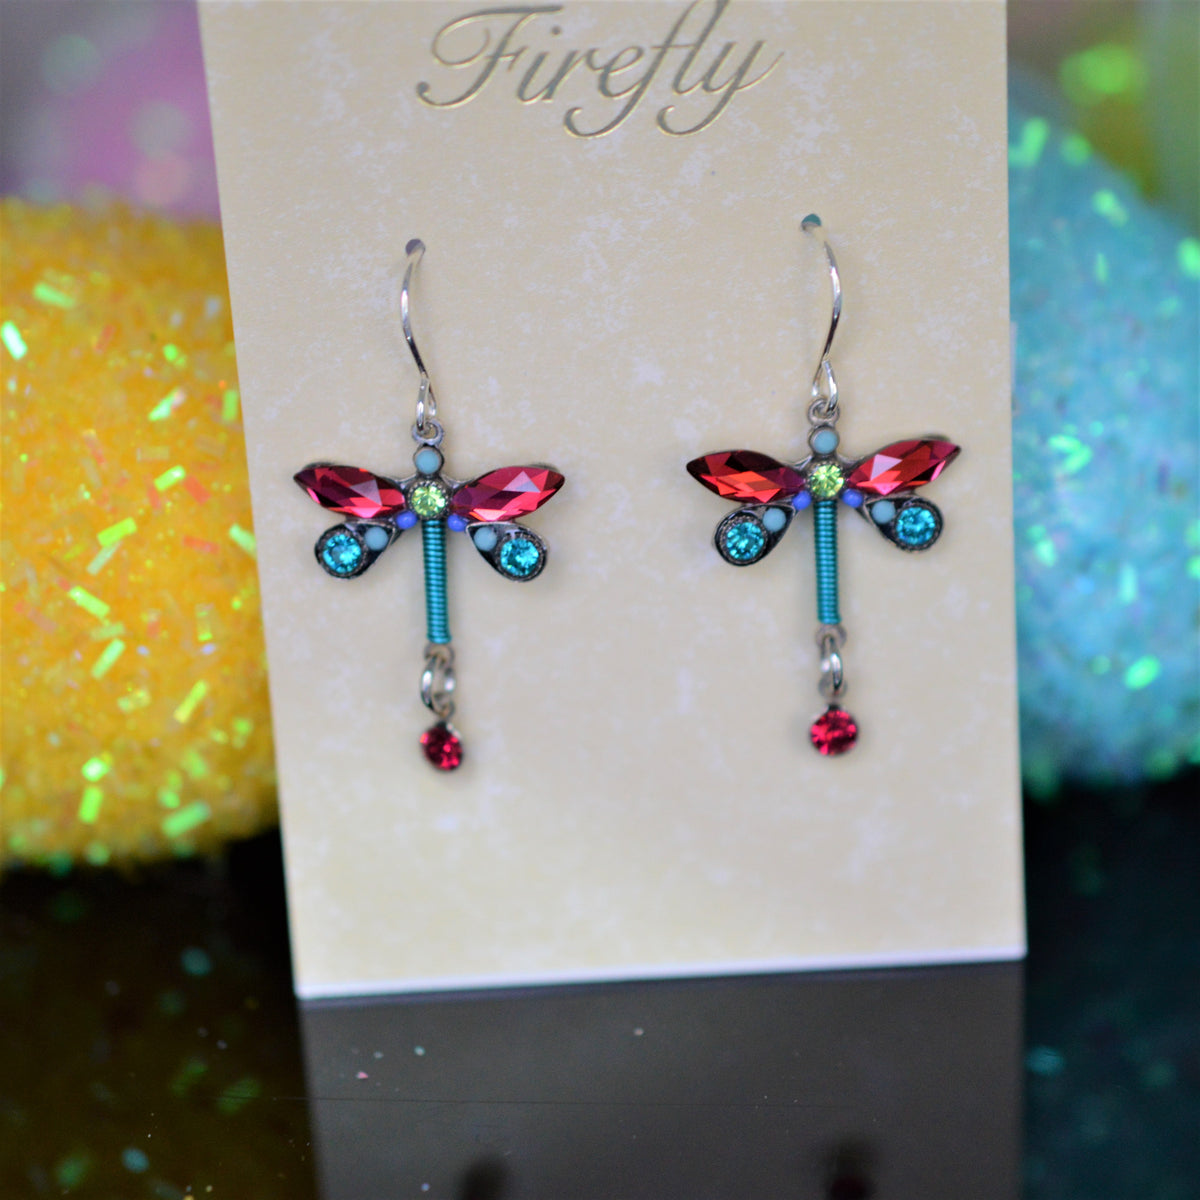 Antique Sterling Silver Plated Dragonfly Earrings by Firefly